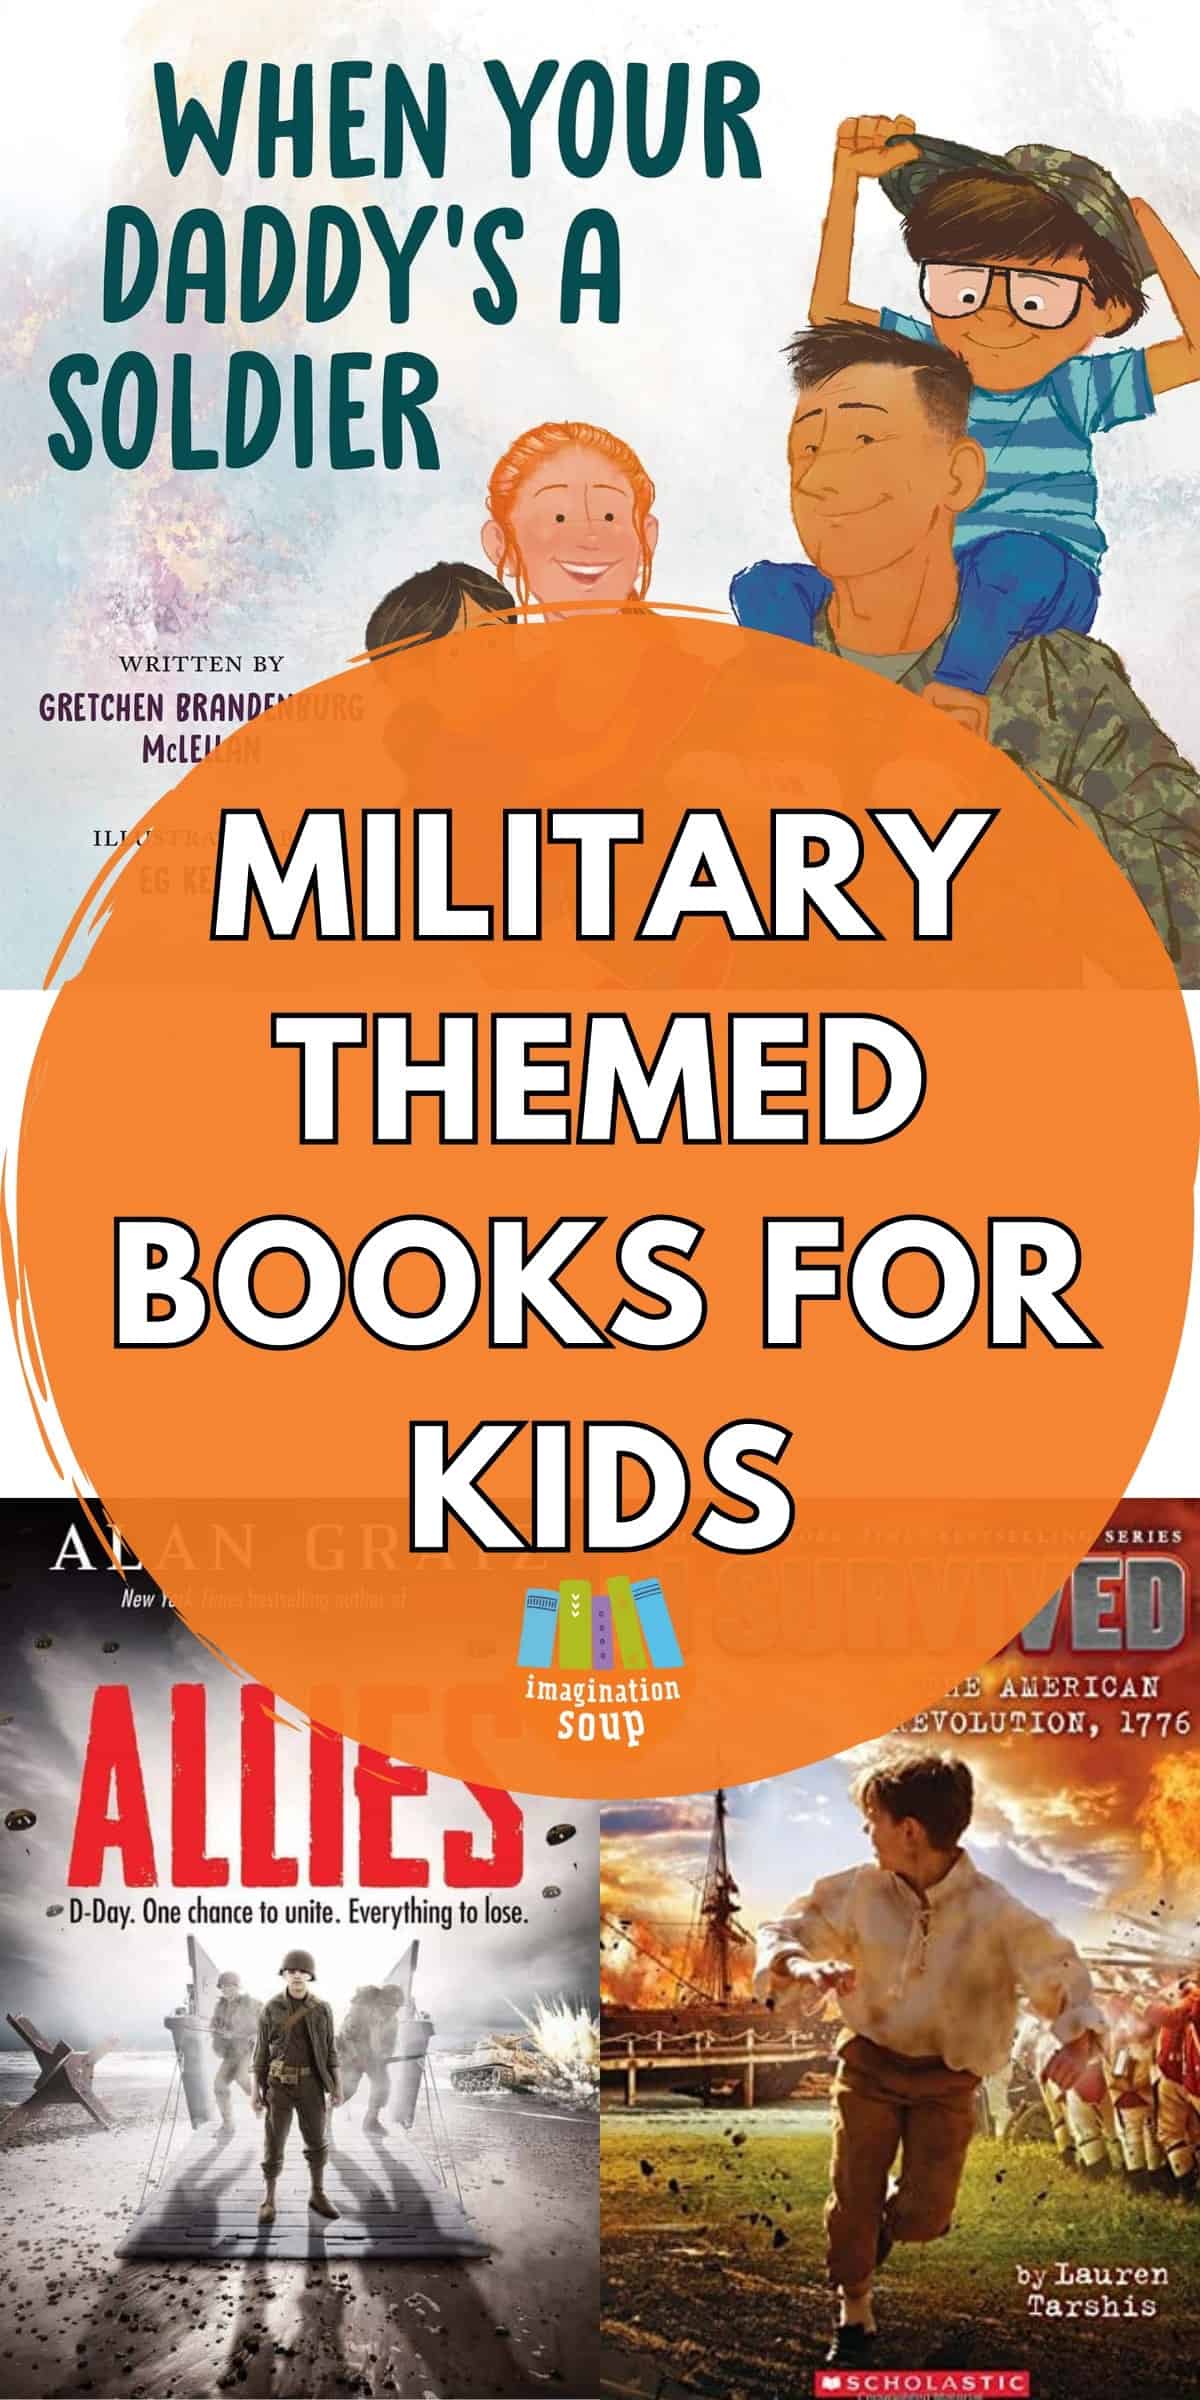 Military themed books for Memorial Day and Veterans Day